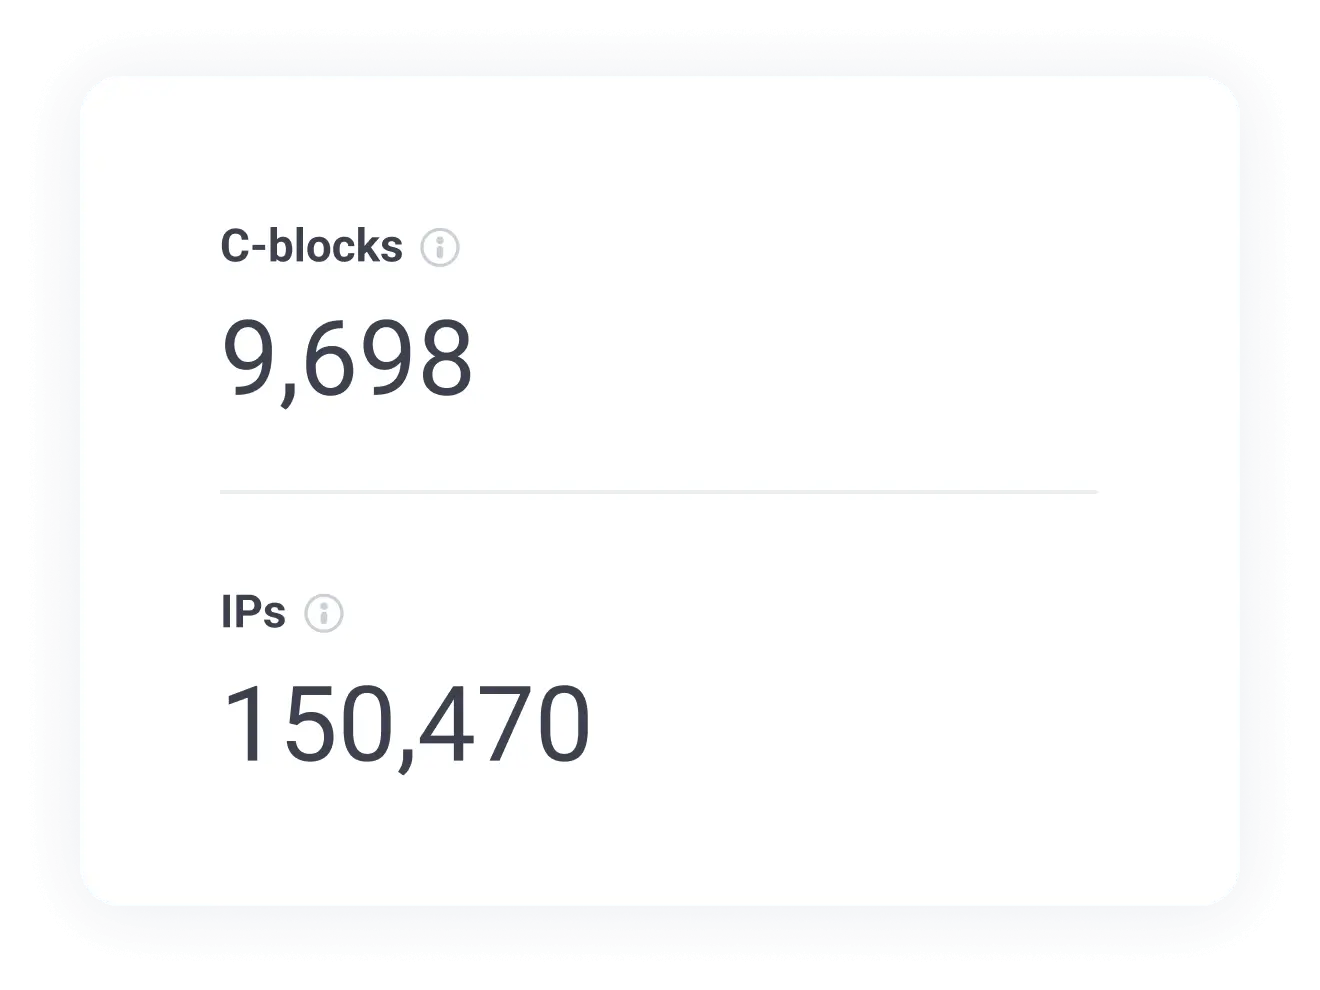 Check the number of unique IPs and C-blocks